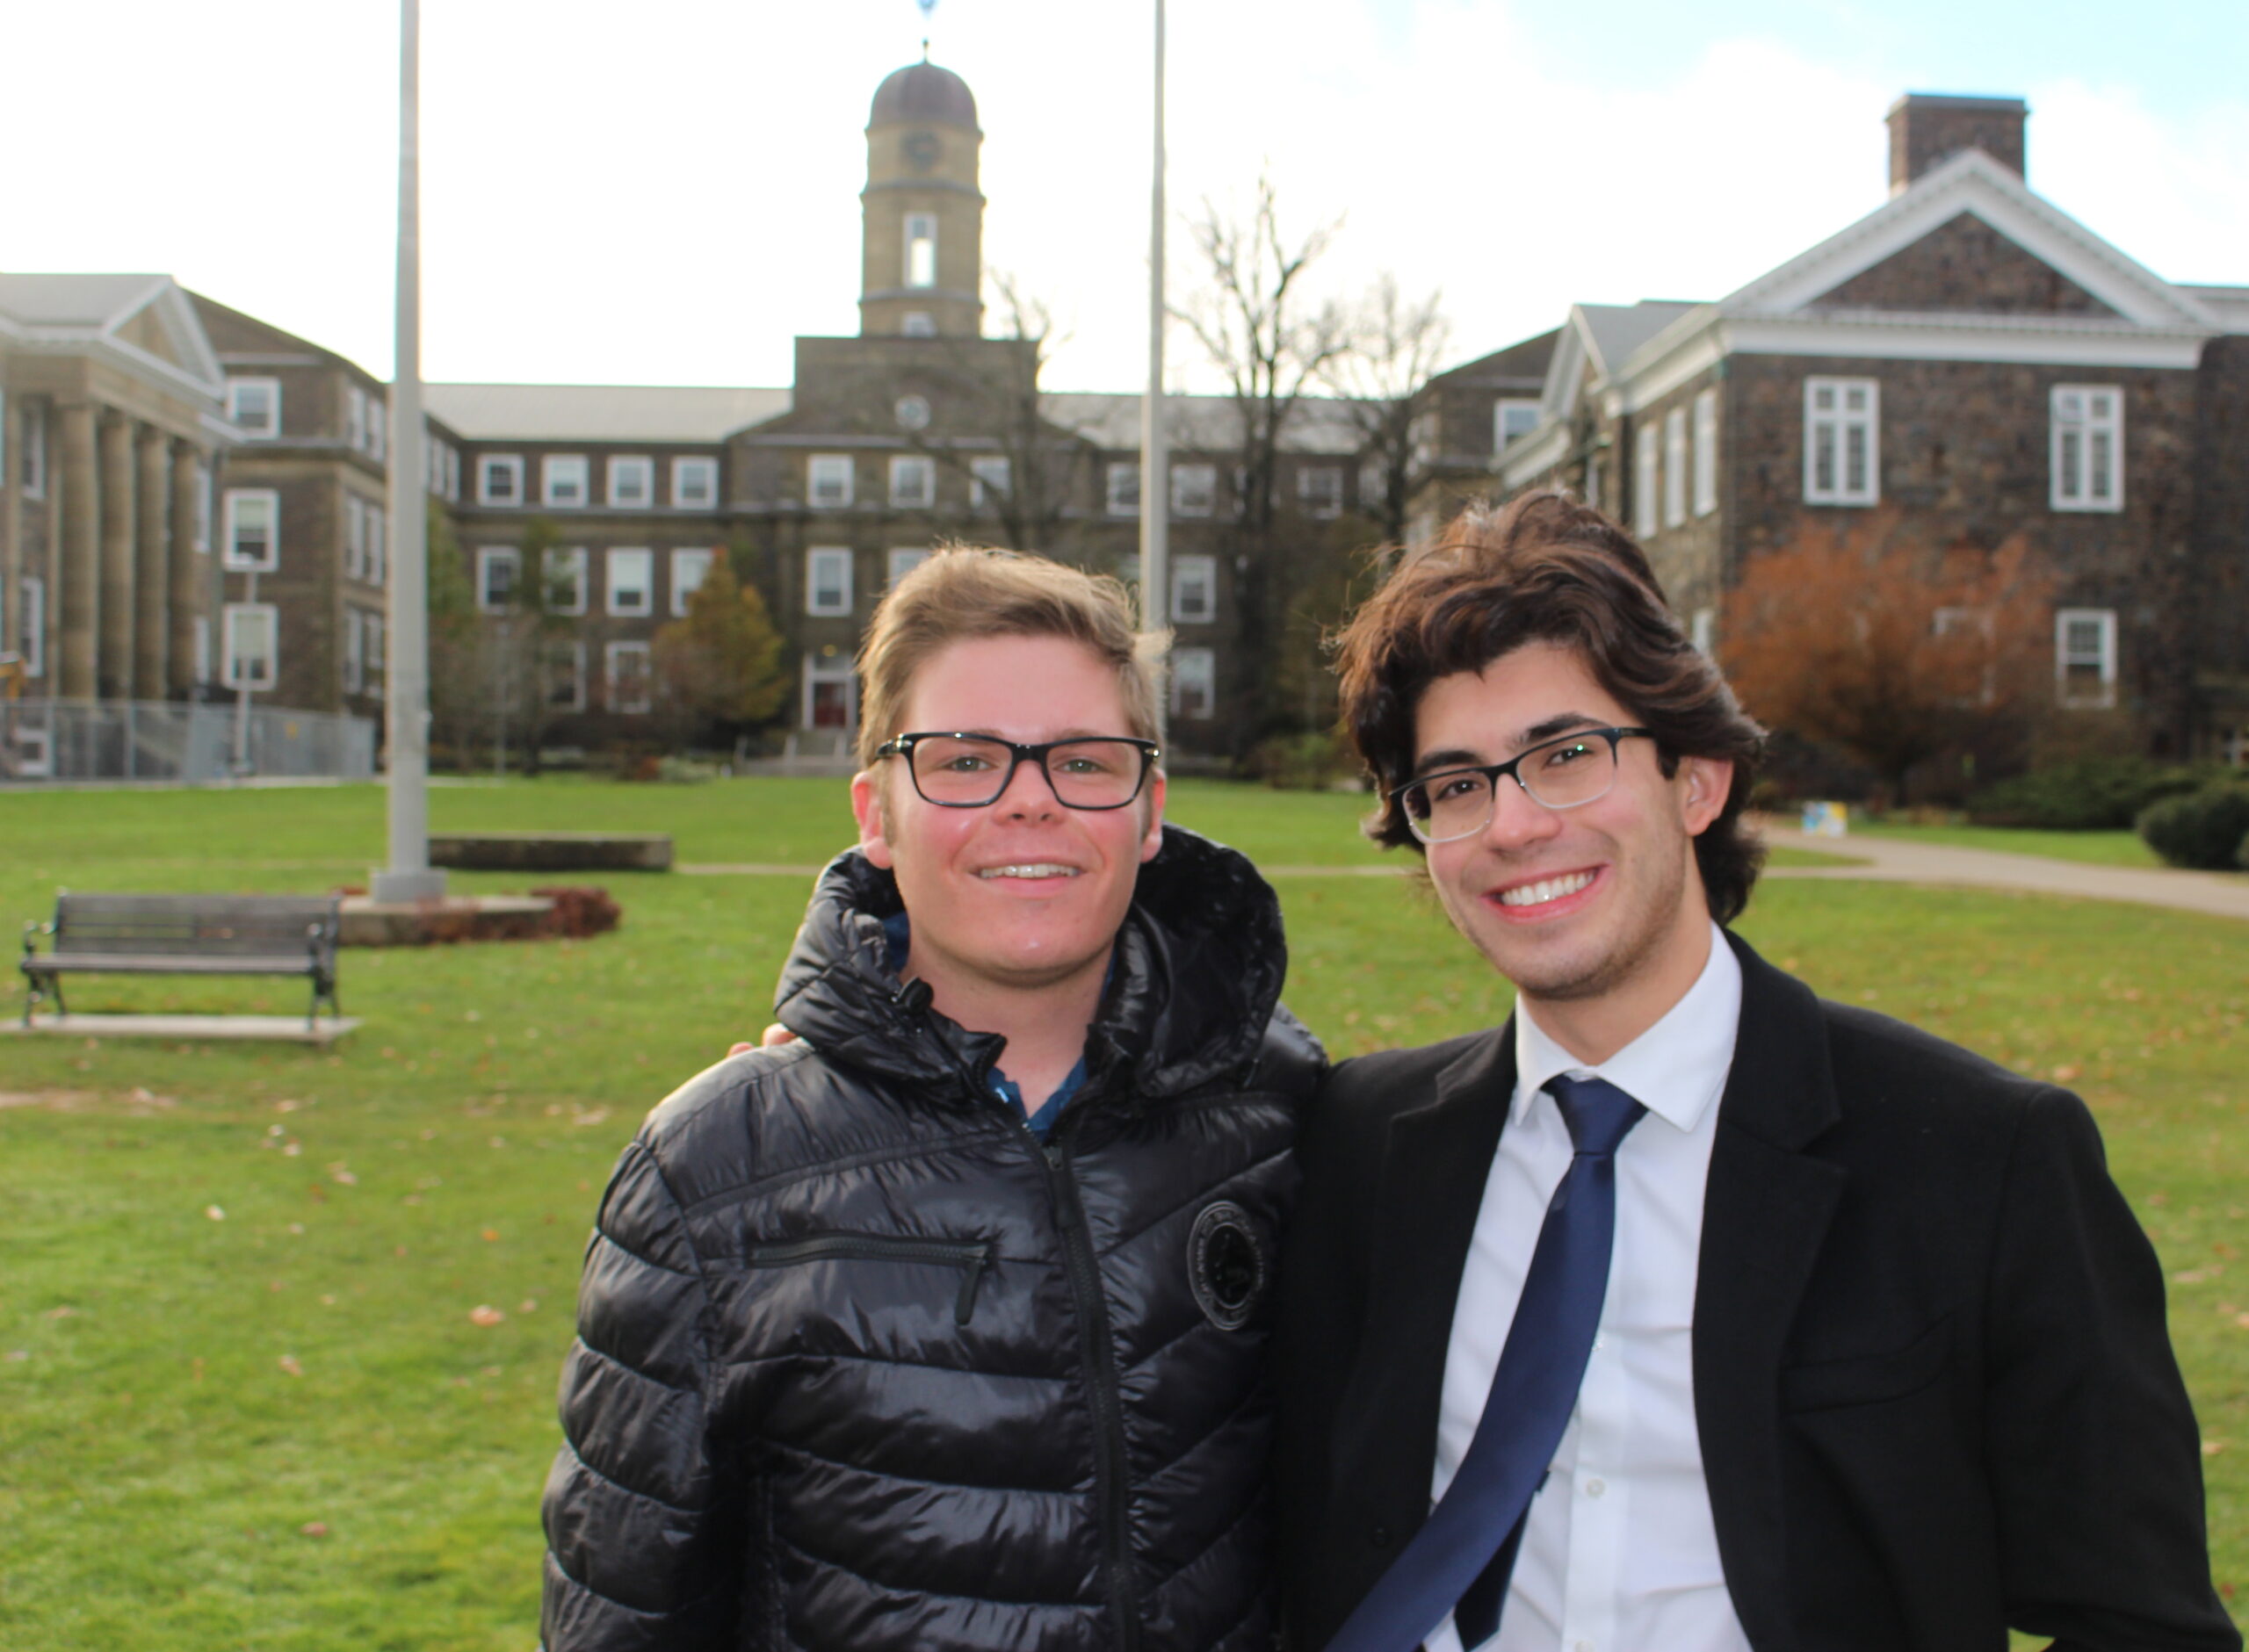 Evan Colclough (left) and Kai Jassal pose in front of the Henry Hicks building on Dalhousie campus.